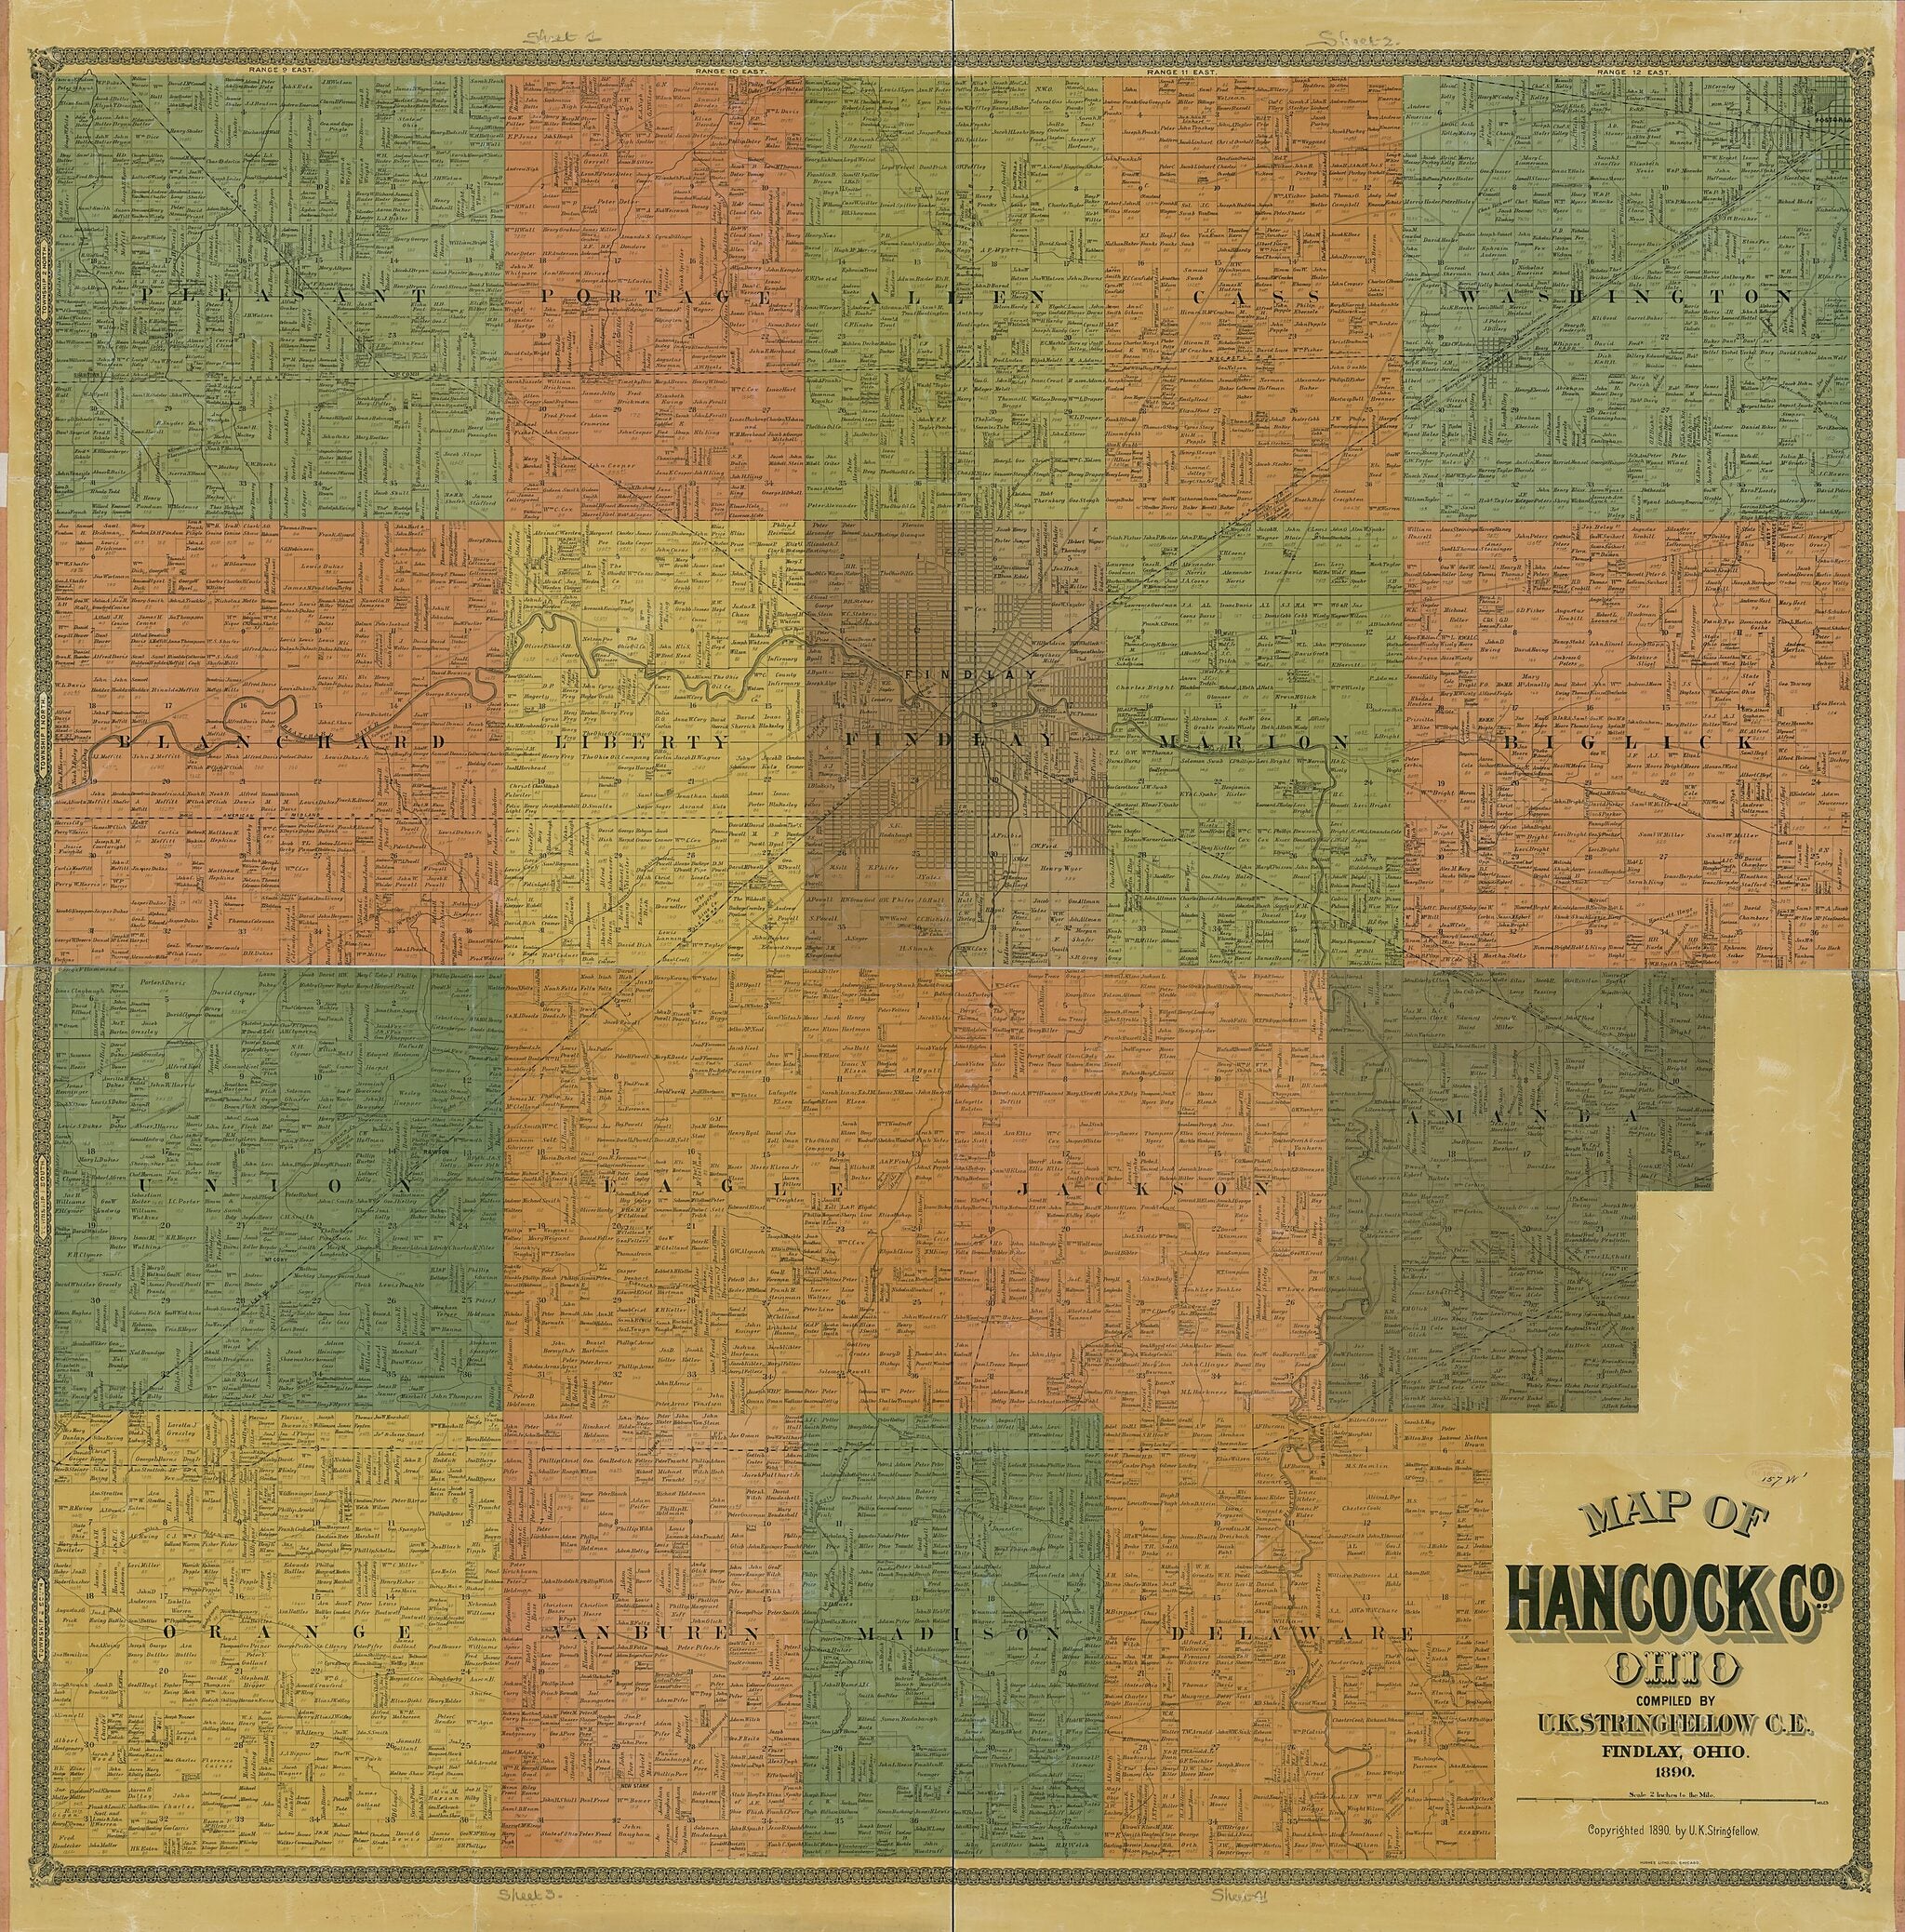 This old map of Map of Hancock County, Ohio from 1890 was created by U. K. Stringfellow in 1890